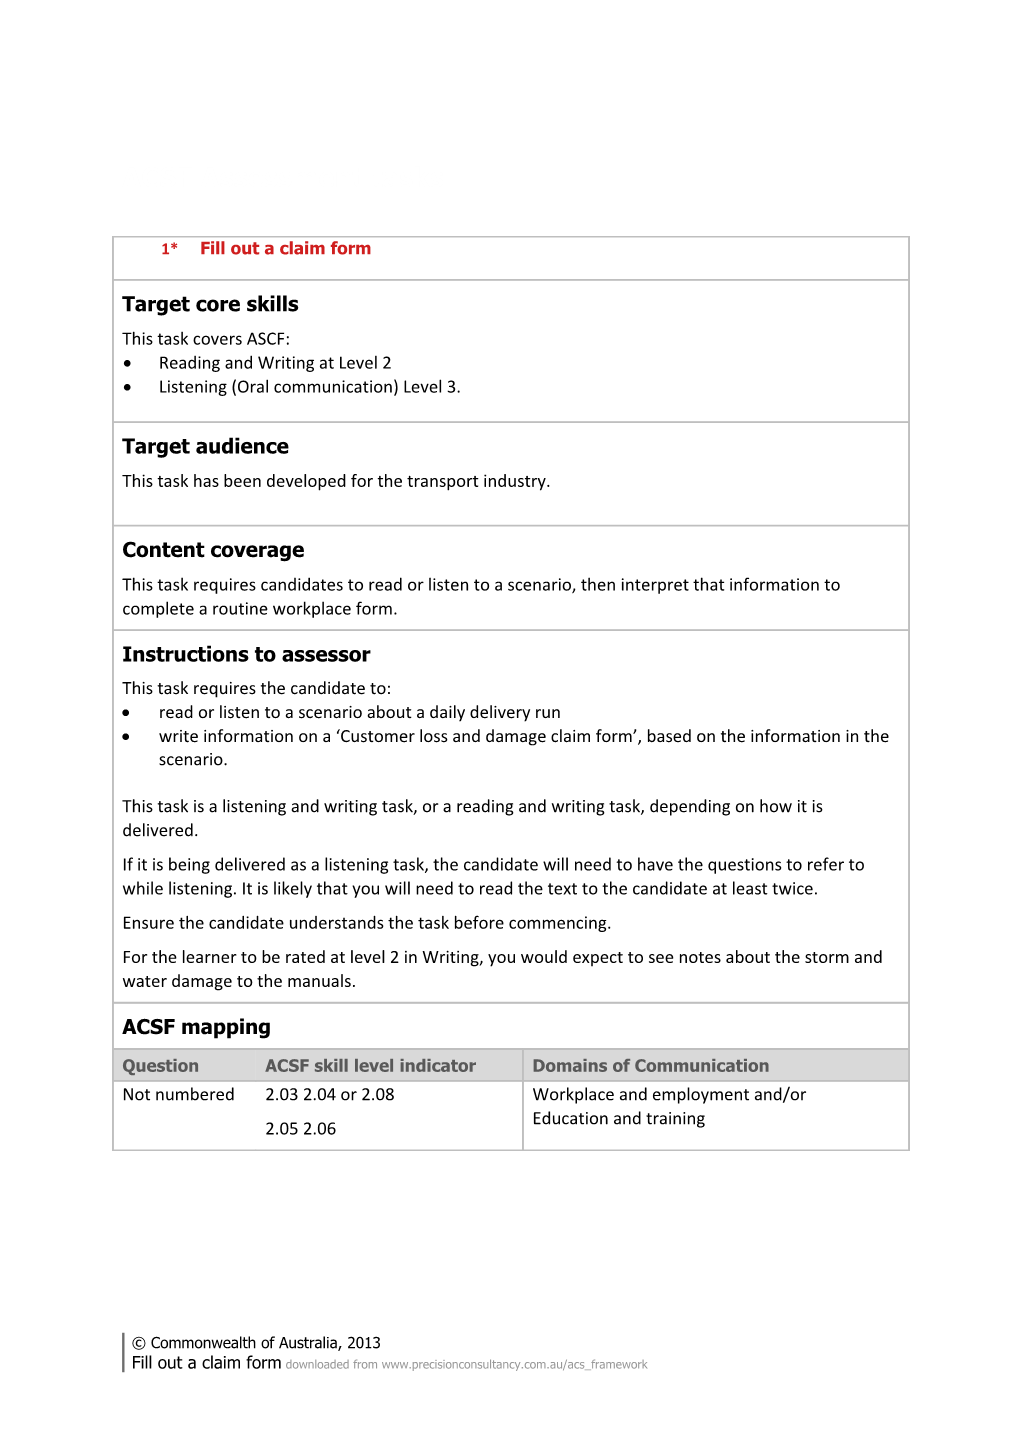 Fill out a Claim Form